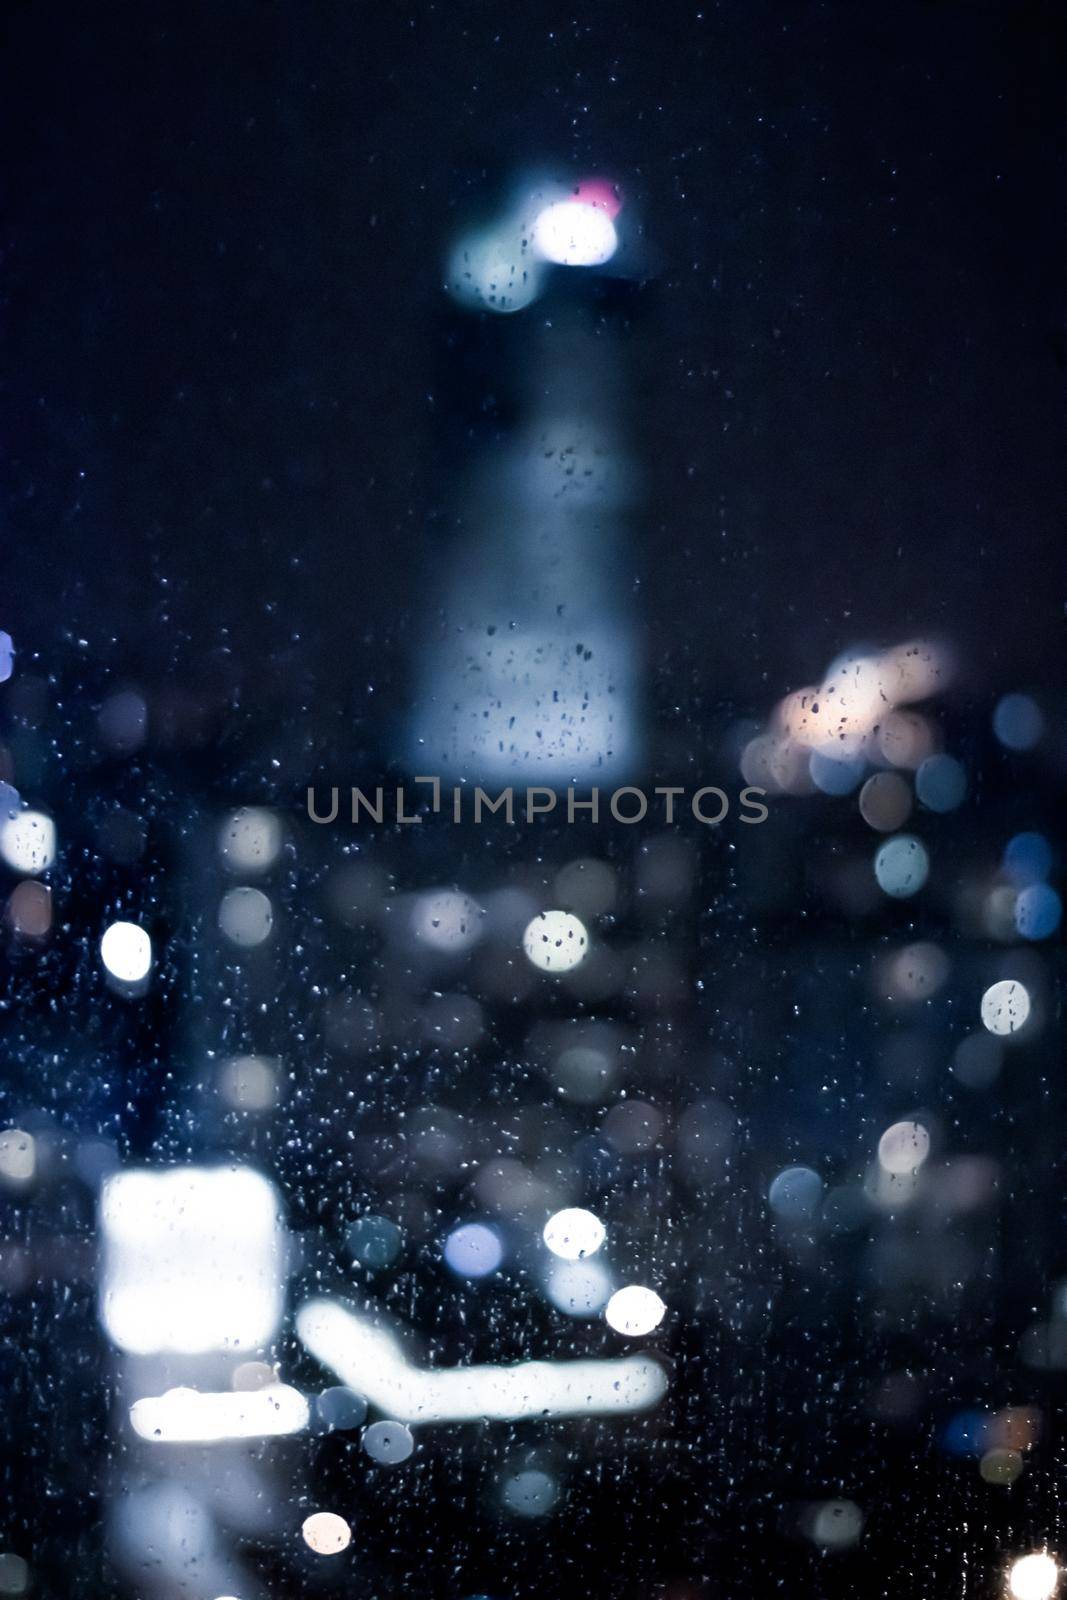 Blurry metropolitan district - night life, abstract background and modern dark tones concept. Big city comes alive at night